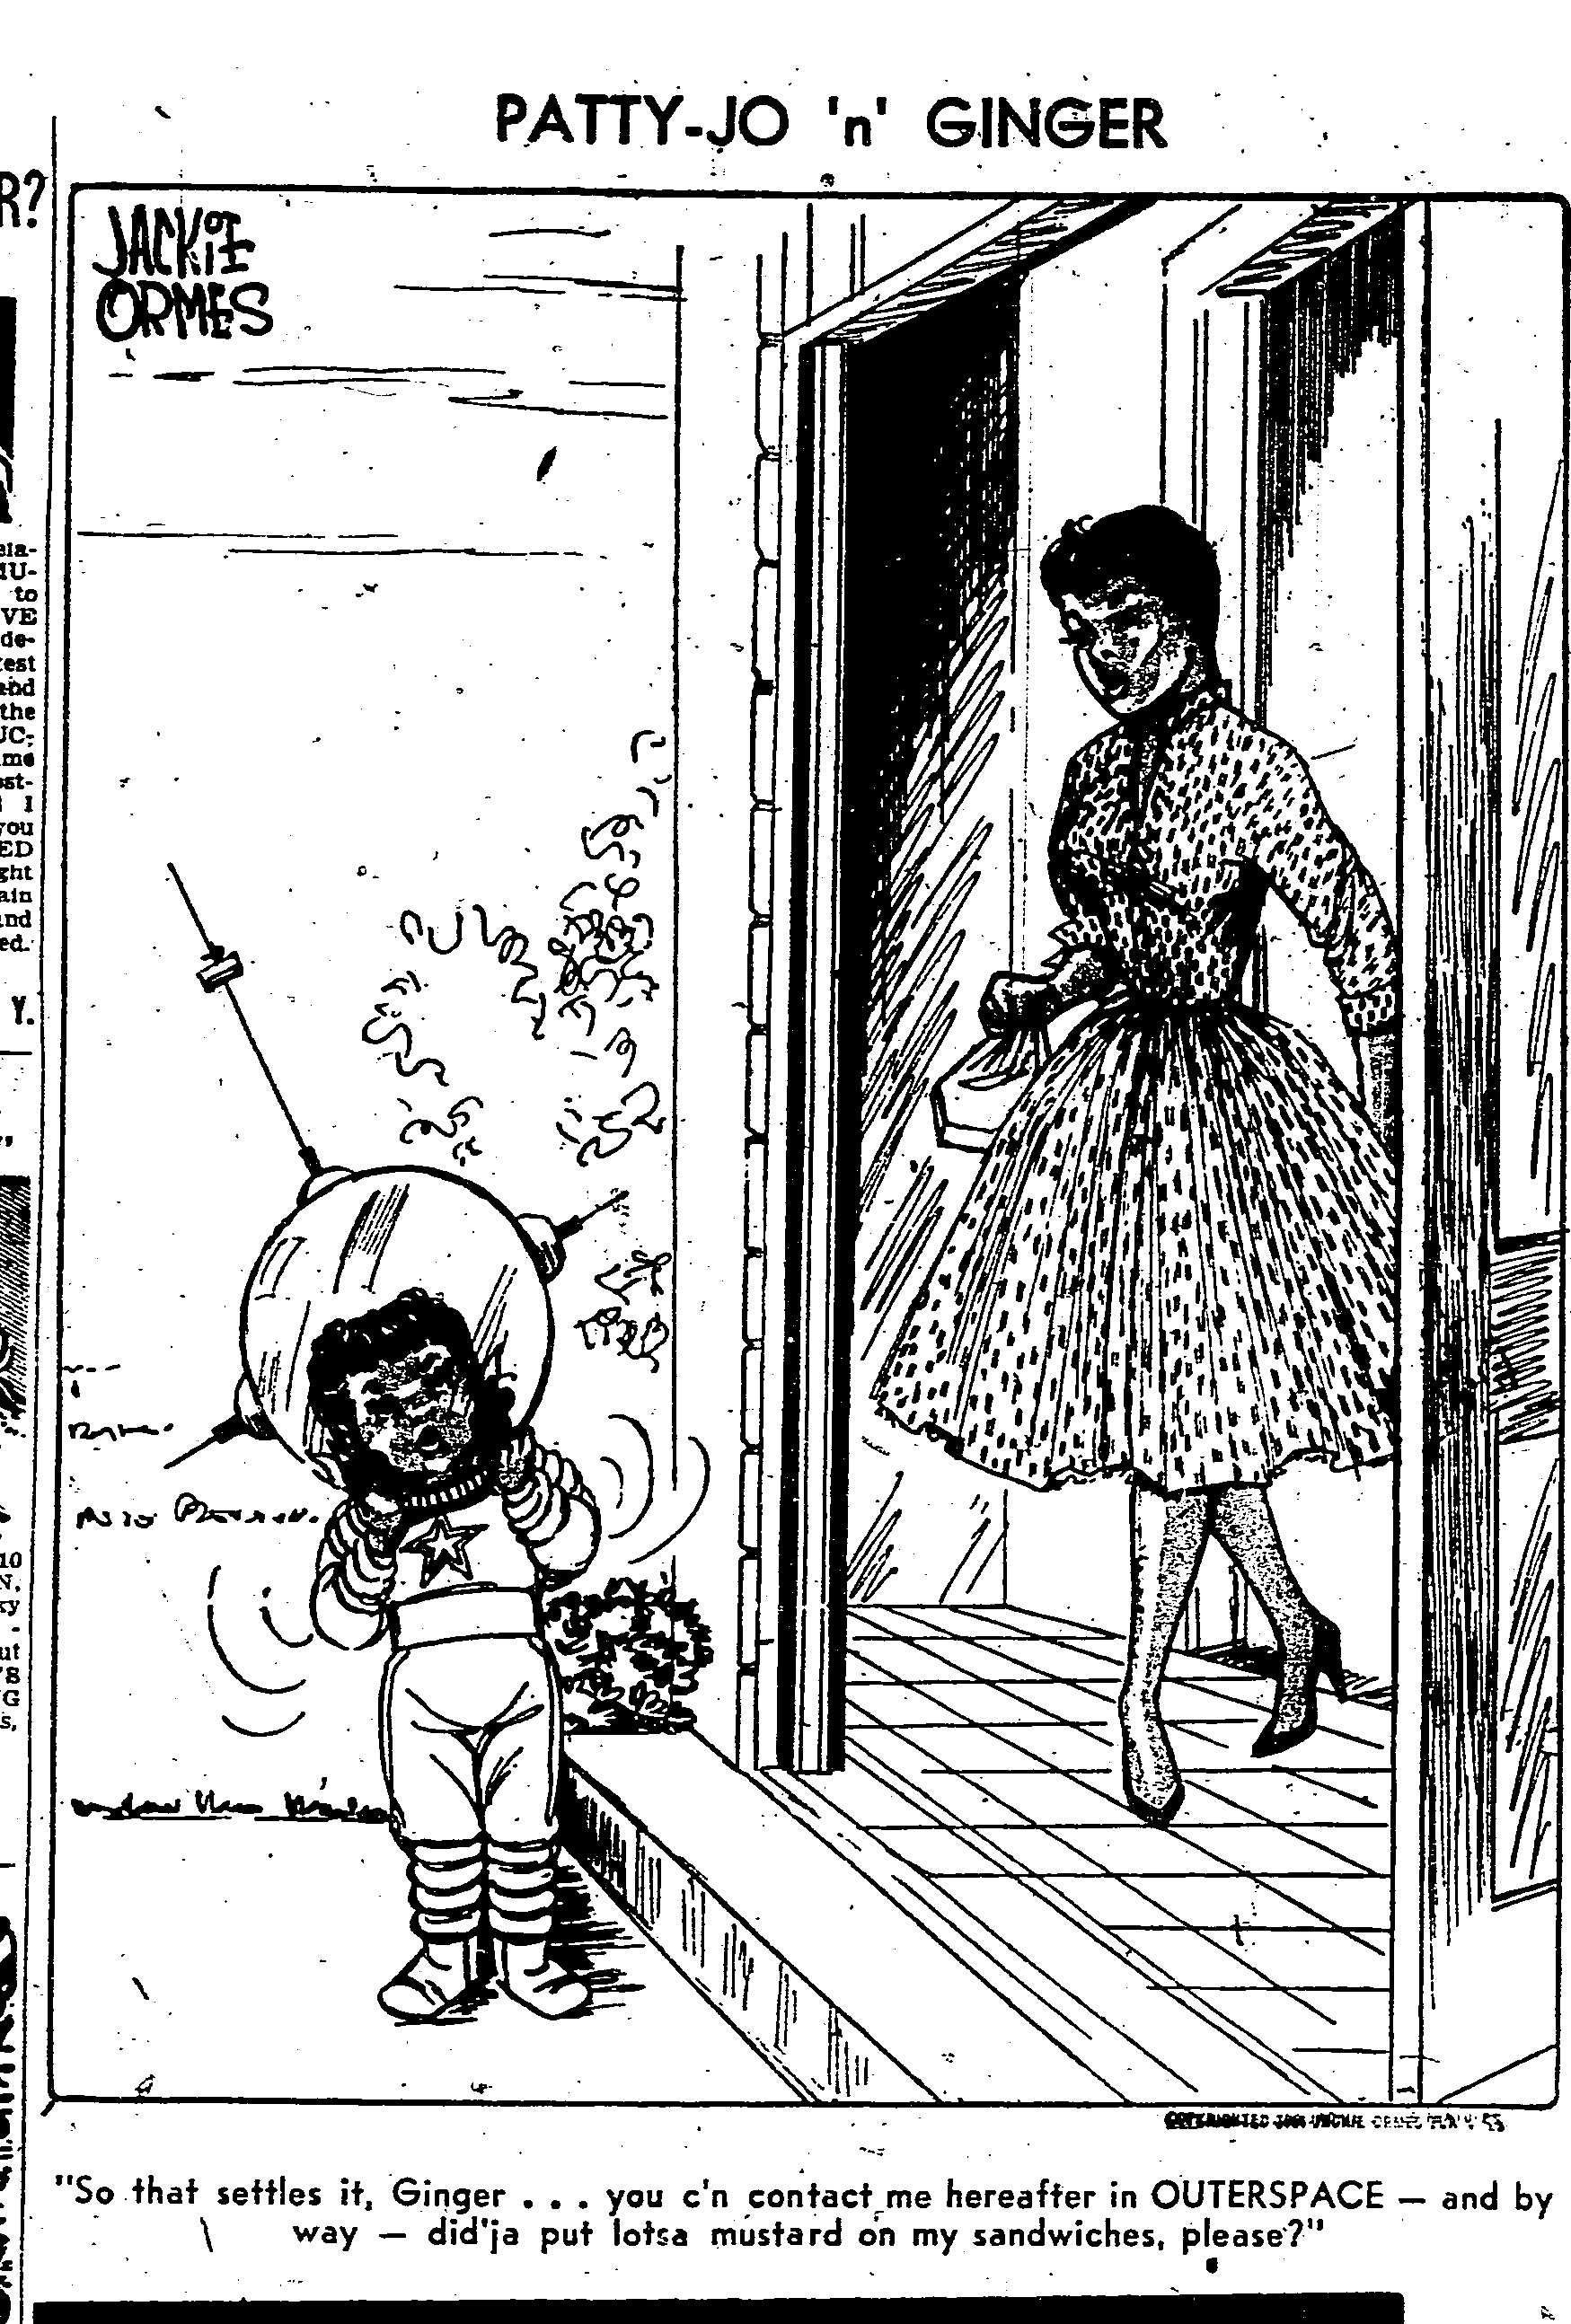 A panel of Jackie Ormes' cartoon, “Patty-Jo 'n' Ginger,”. A yound kid is dressed as an astronaut outside as thier mom watches.